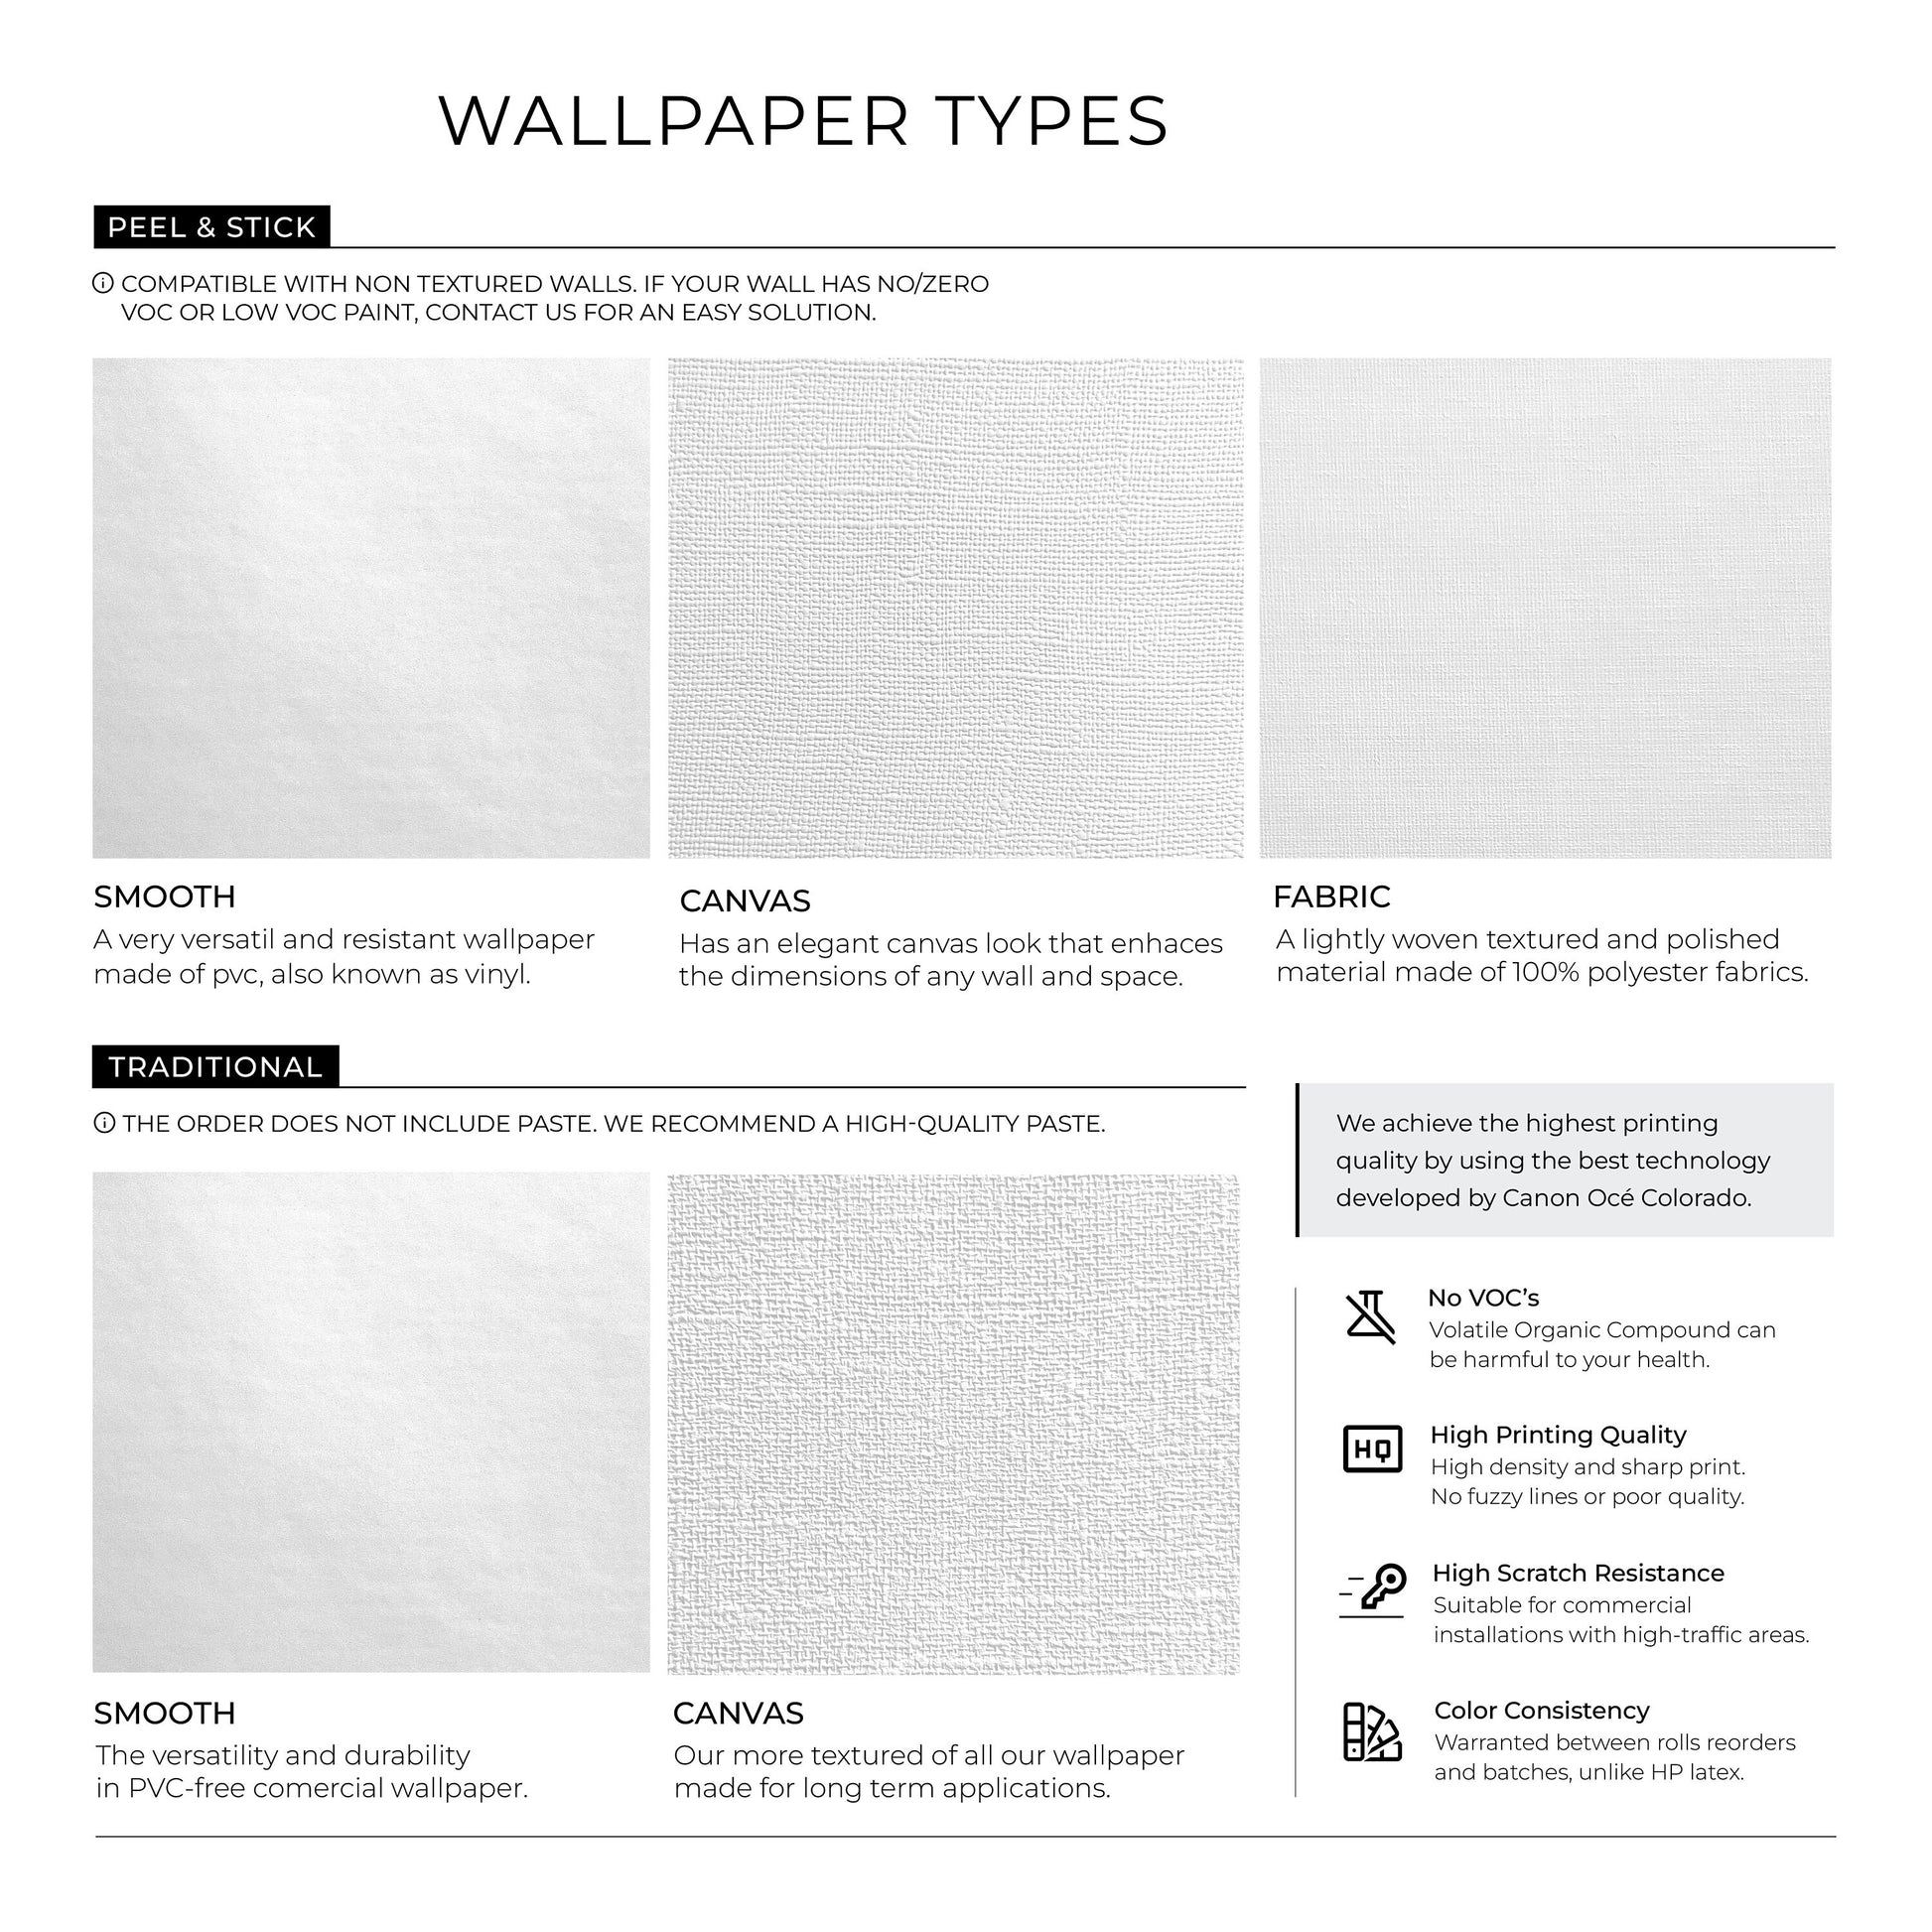 Removable Wallpaper Temporary Wallpaper Vintage Wallpaper Peel and Stick Wallpaper Wall Paper Boho - A611